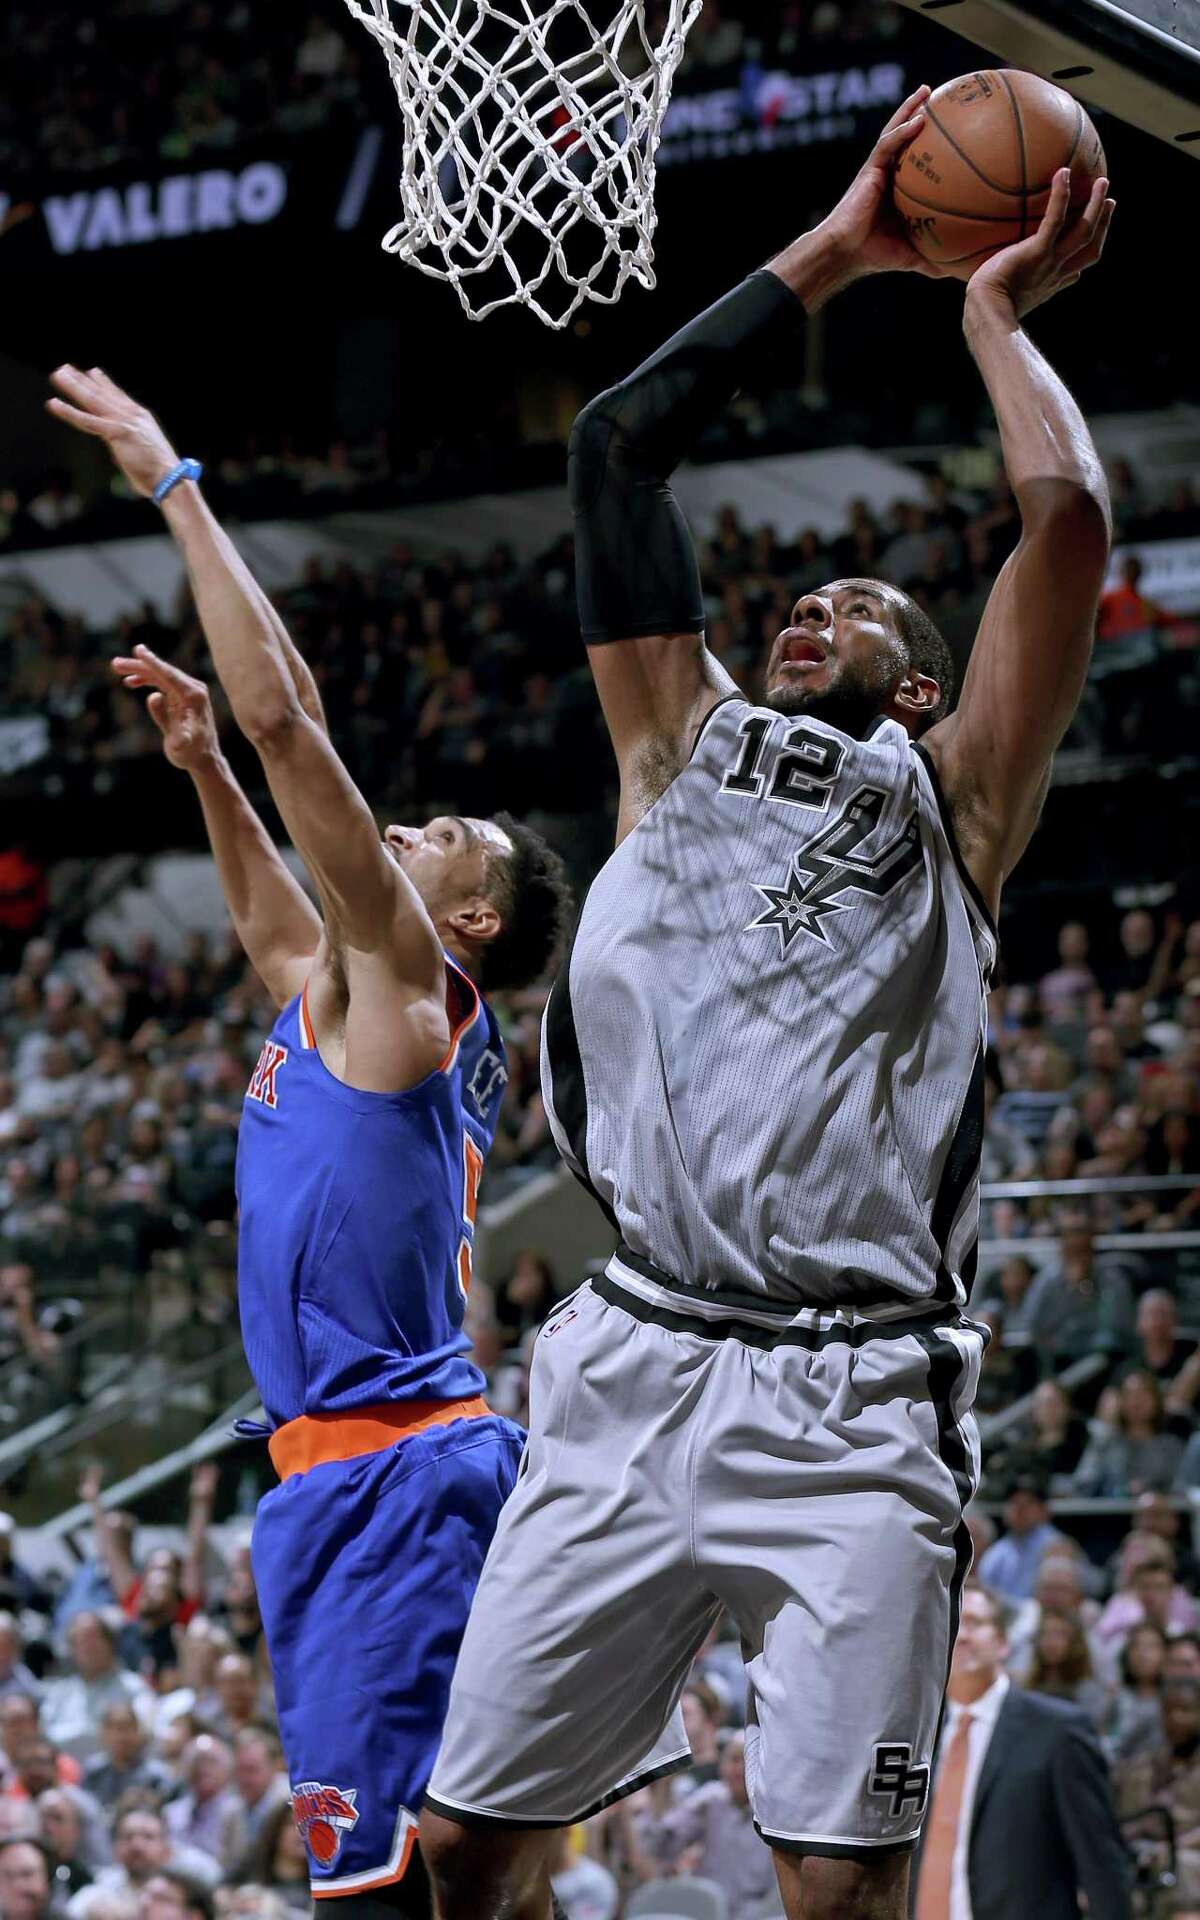 Spurs’ LaMarcus Aldridge grabs a rebound around the New York Knicks’ Courtney Lee during second half action on March 25, 2017 at the AT&T Center.